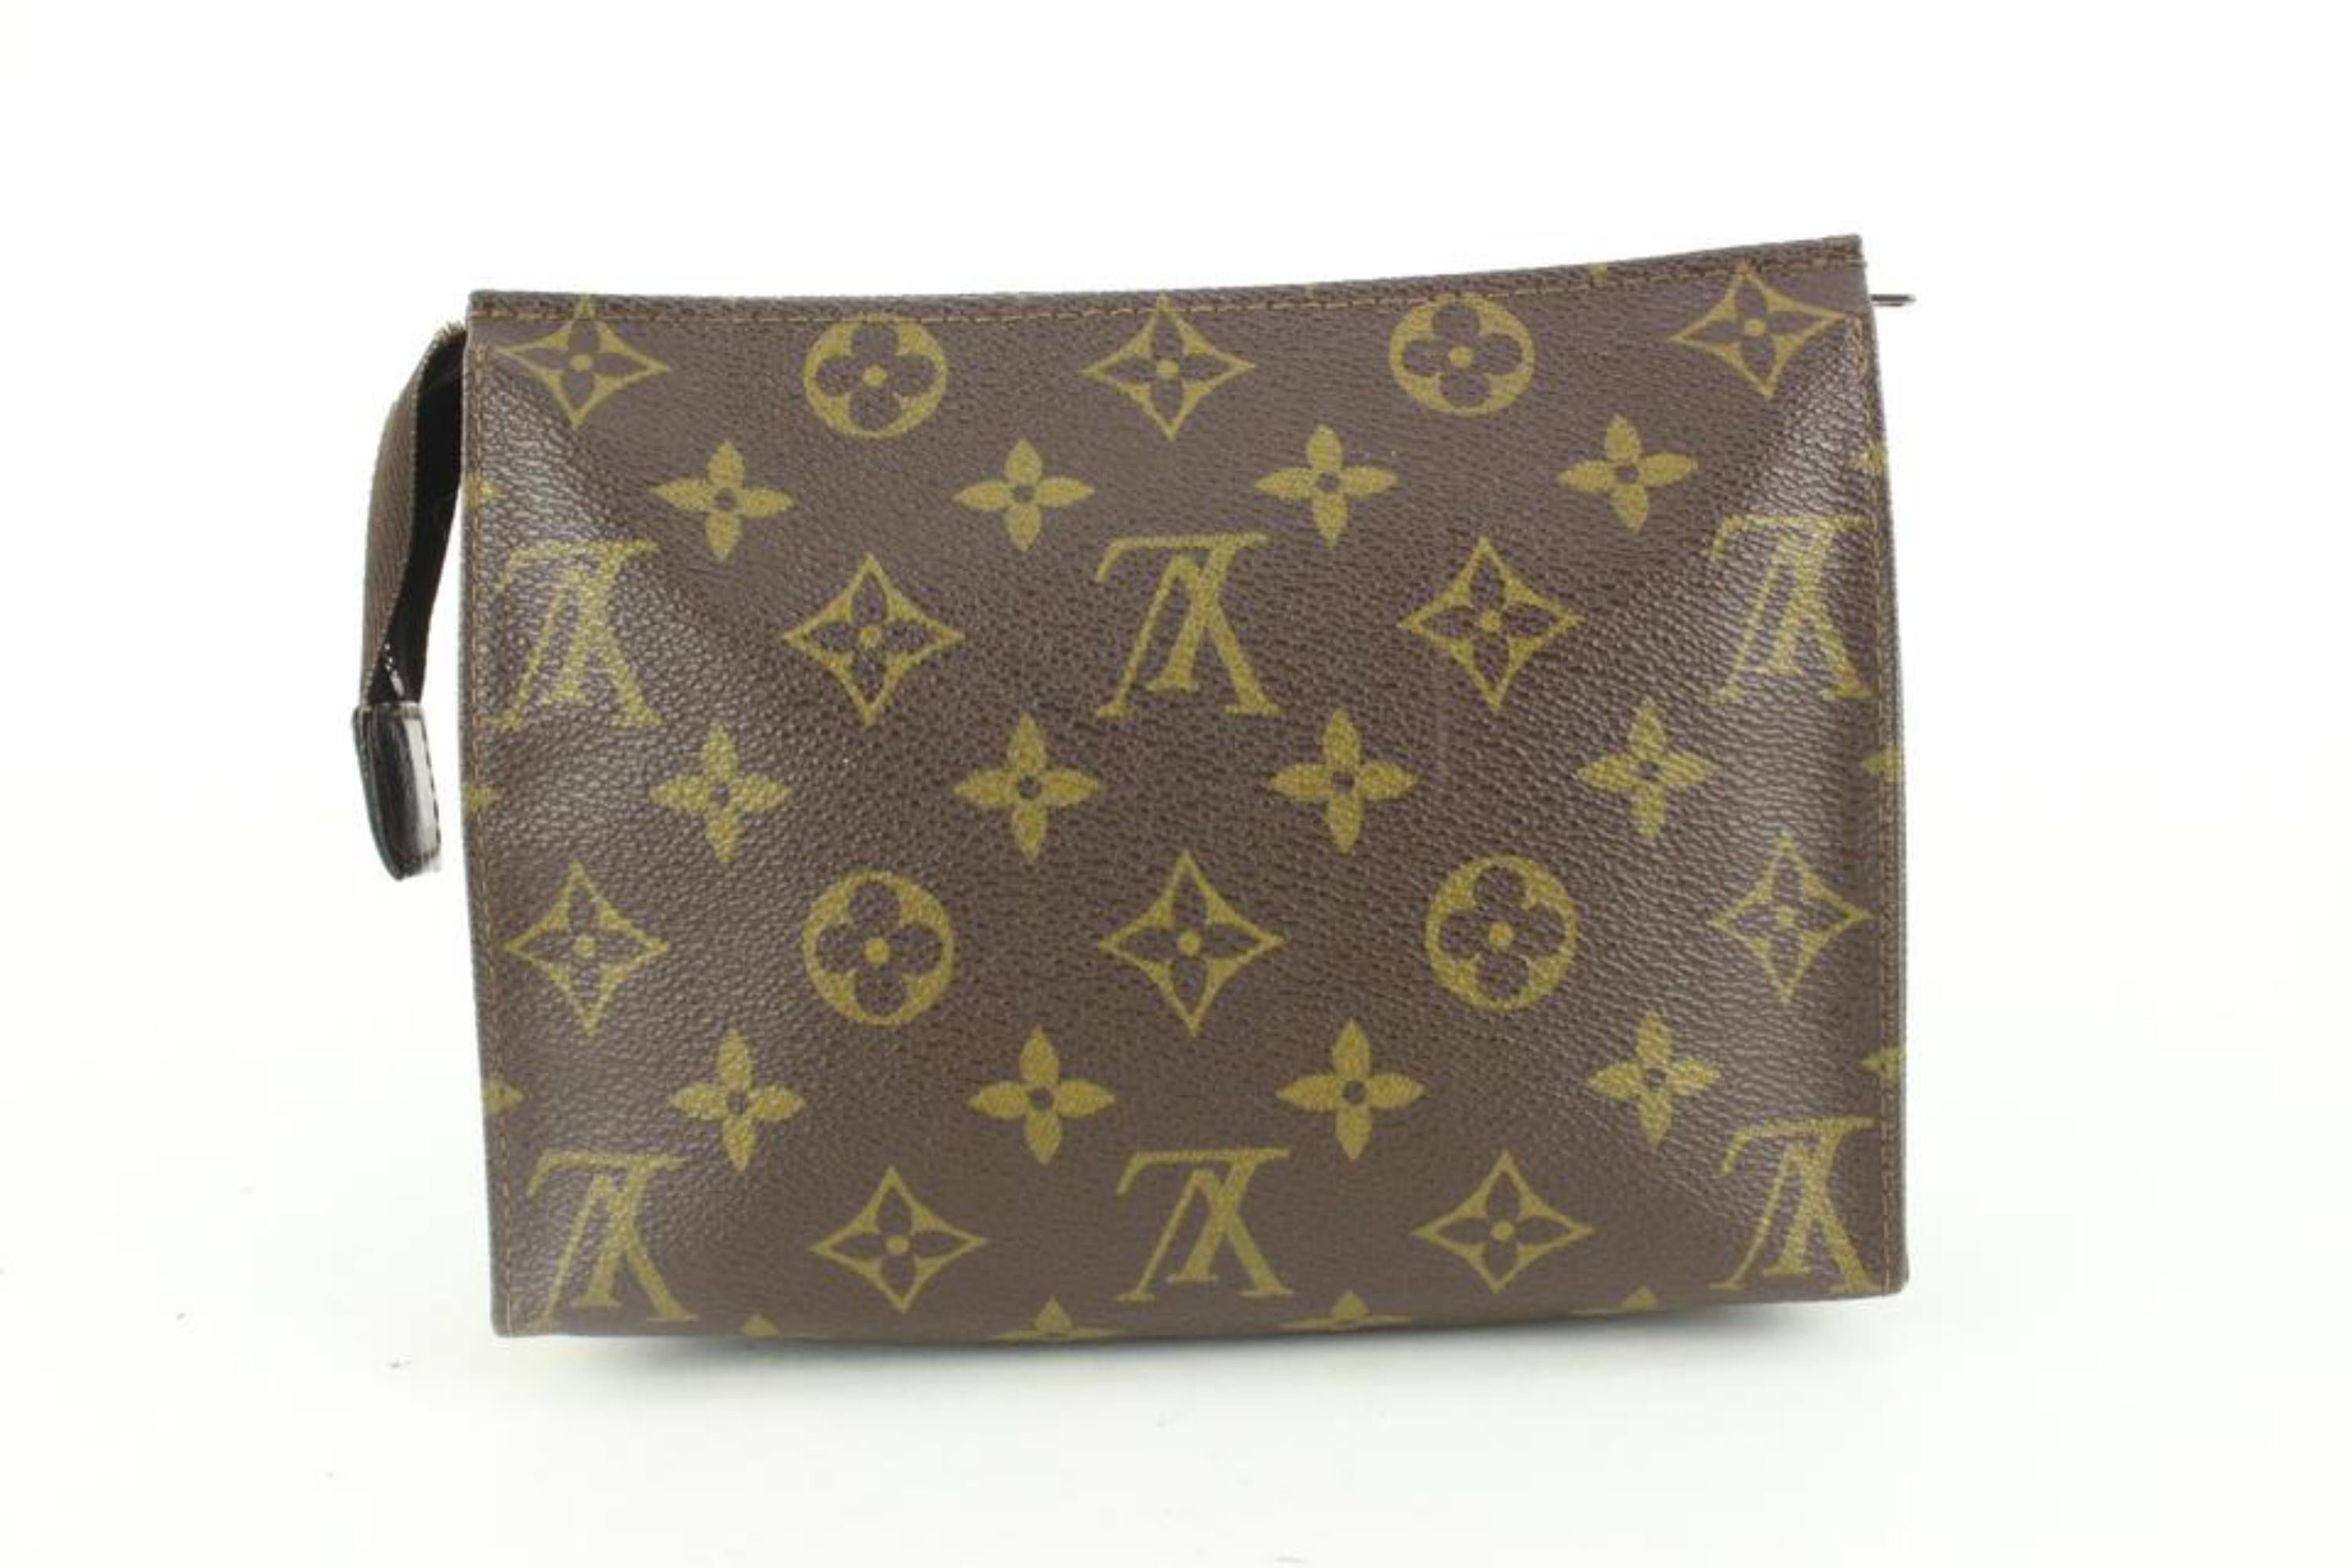 Louis Vuitton Monogram Toiletry Pouch 19 Poche Toilette Cosmetic Case 16lv24 In Good Condition For Sale In Dix hills, NY